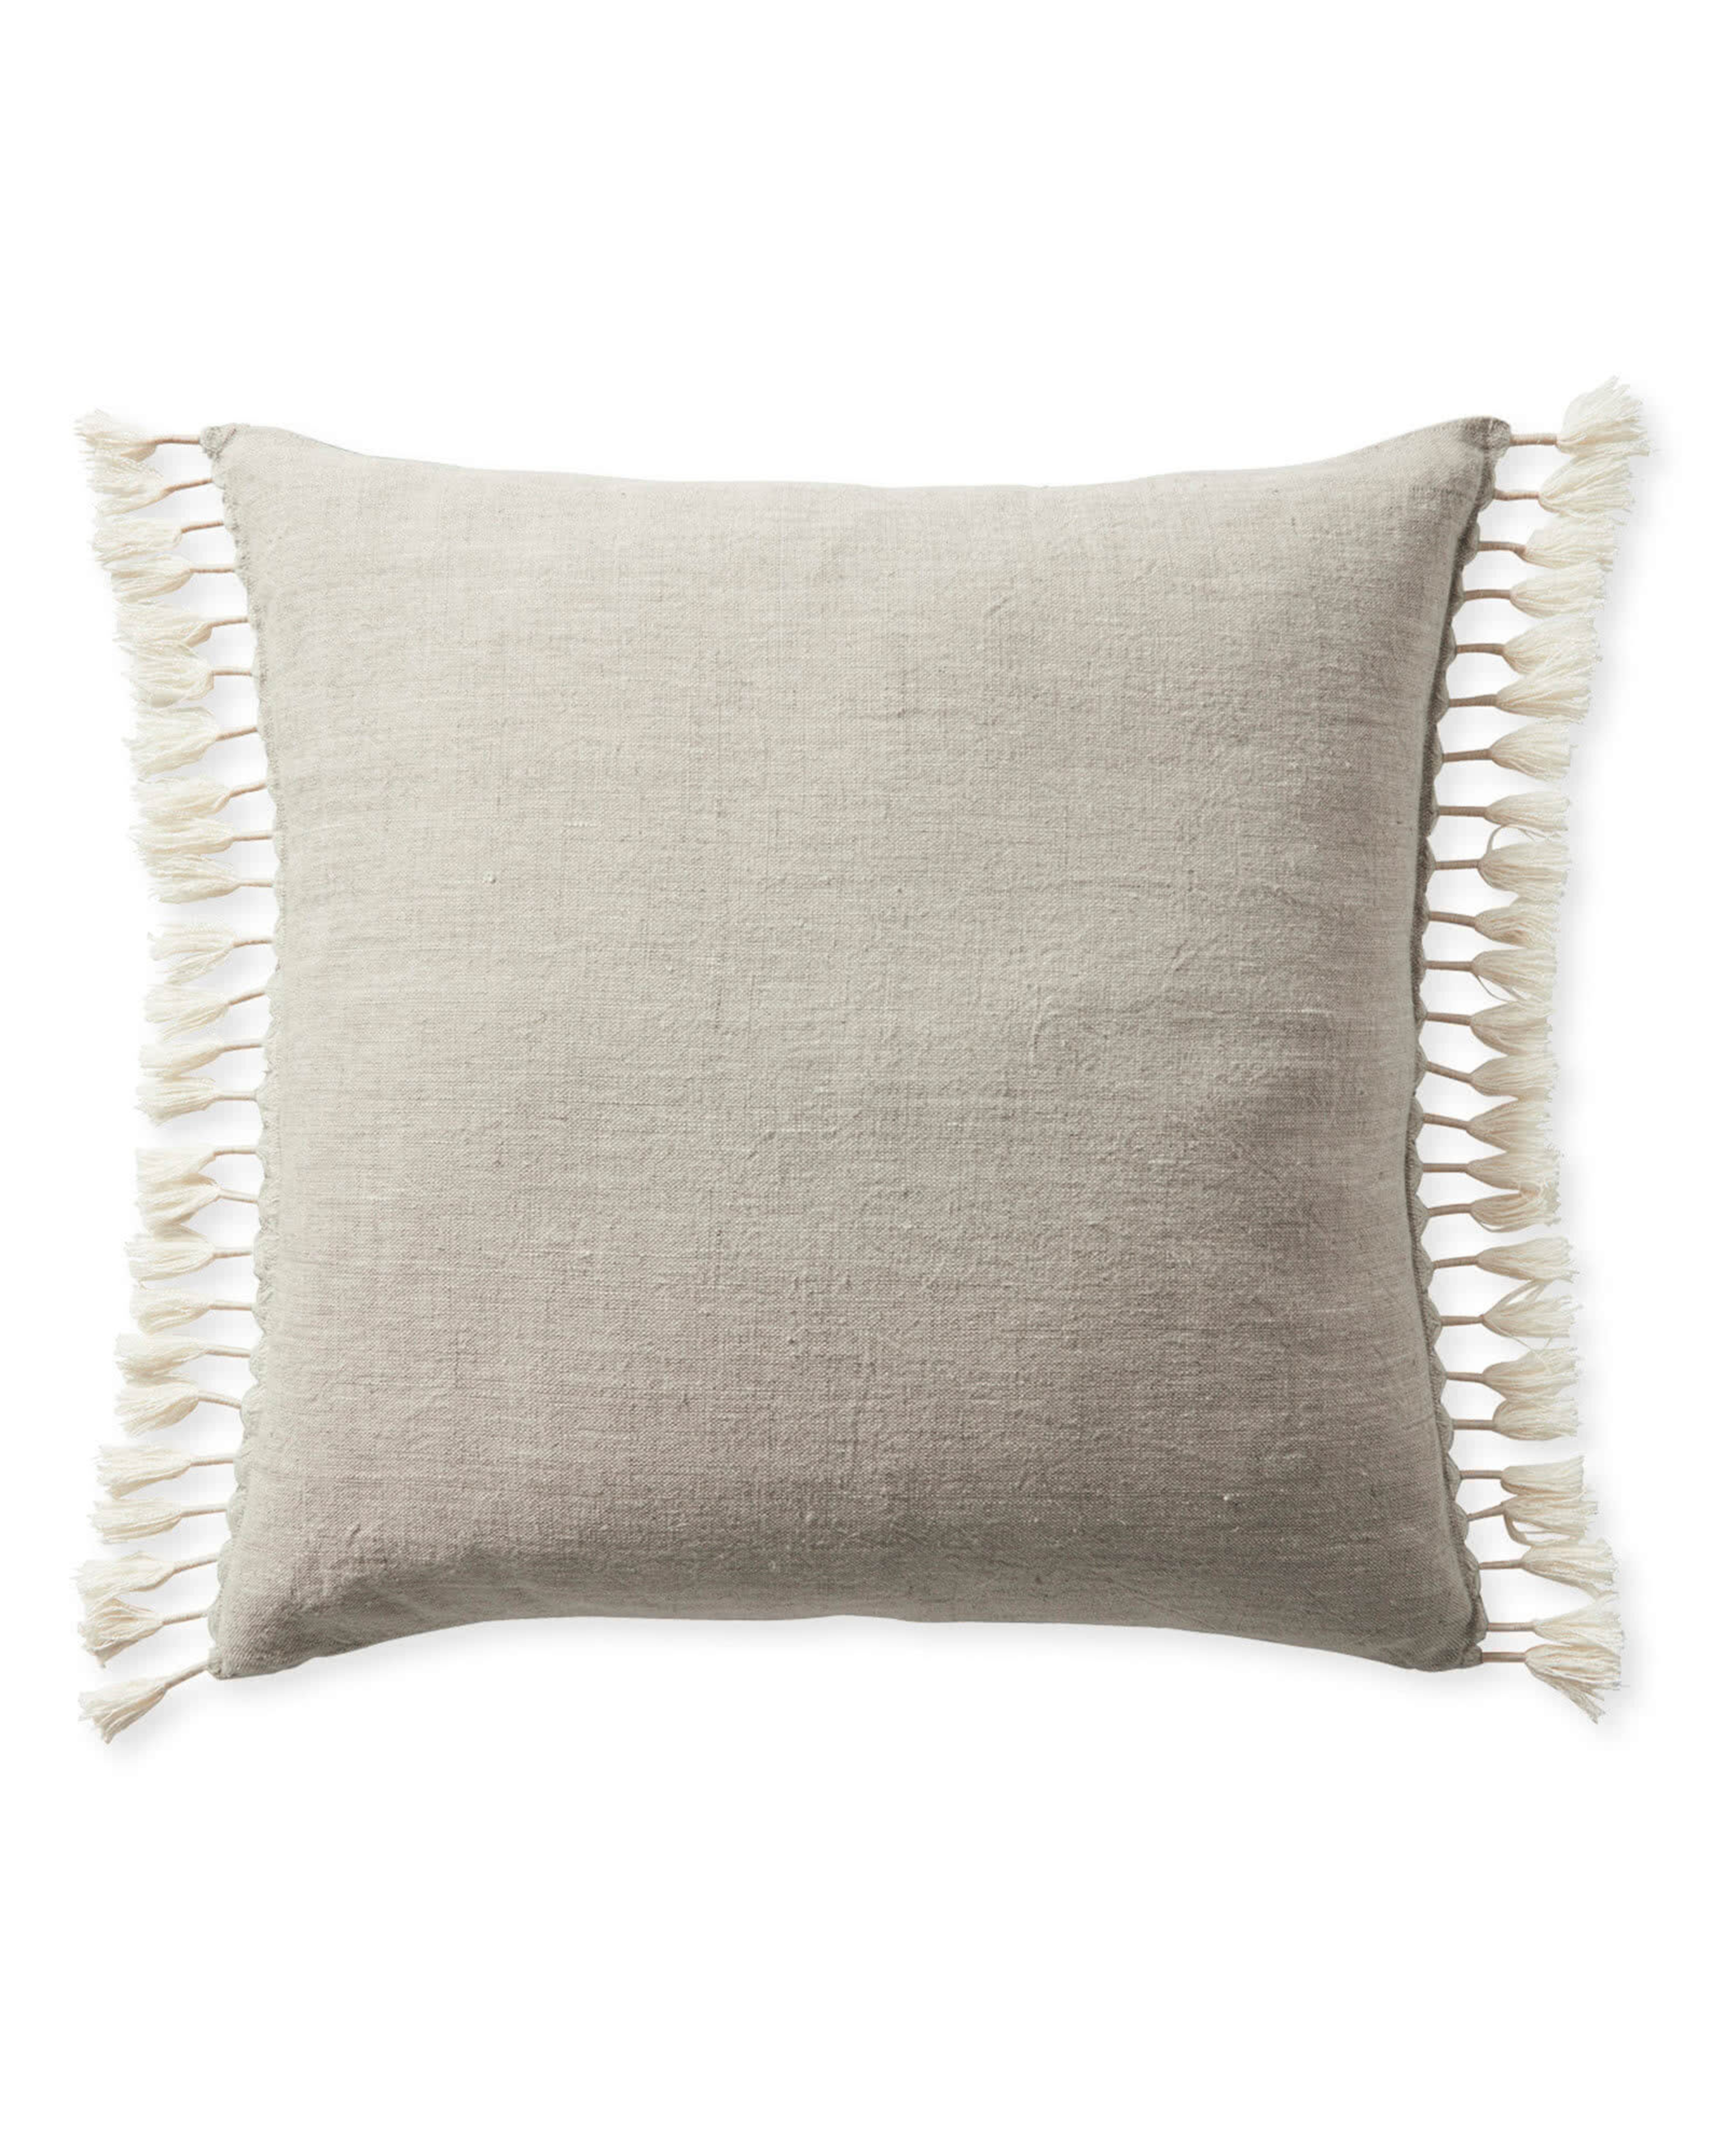 Topanga Pillow Cover - Serena and Lily